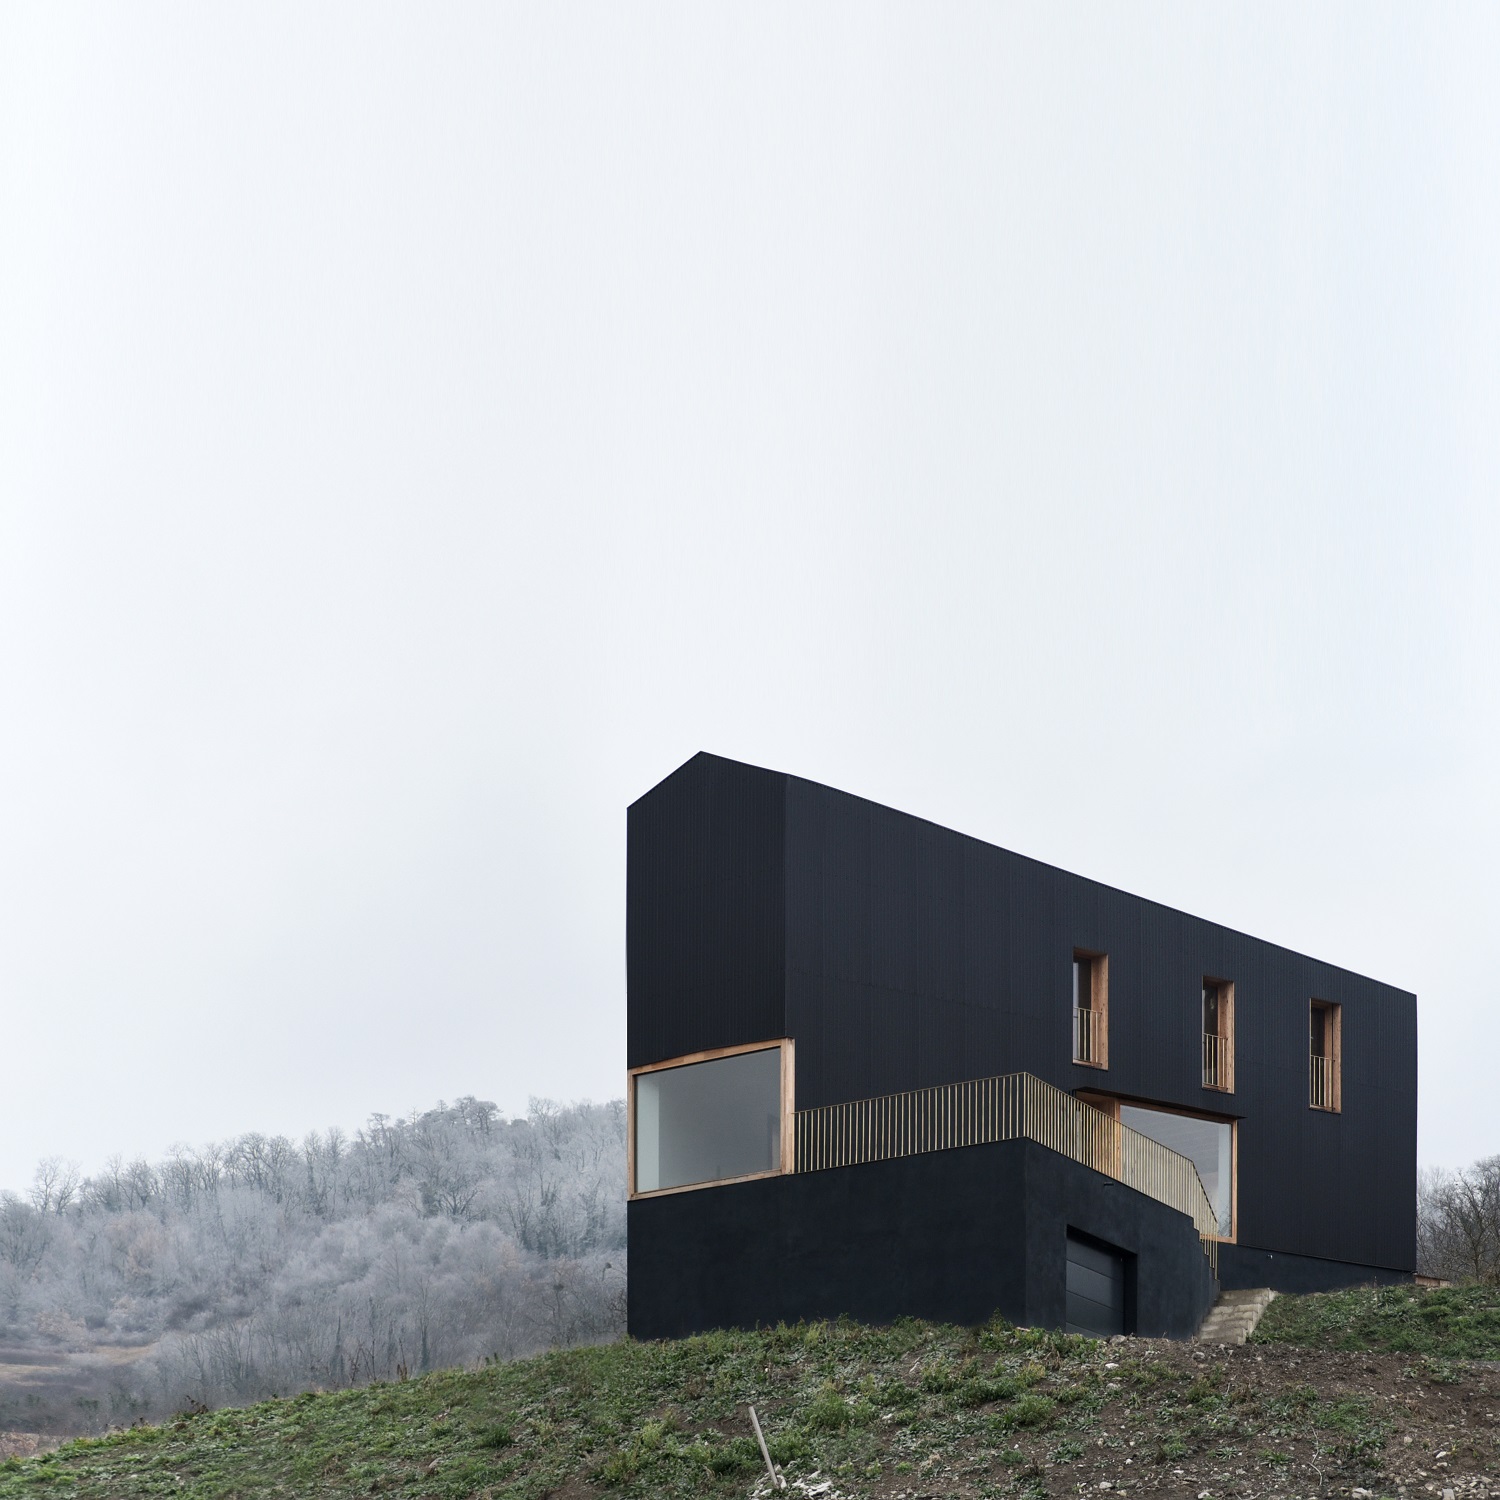 Detached House by RÃ©cita Architecture stands on the edge of the slopes of Puy-de-Mur, a distance from the surrounding rural environment